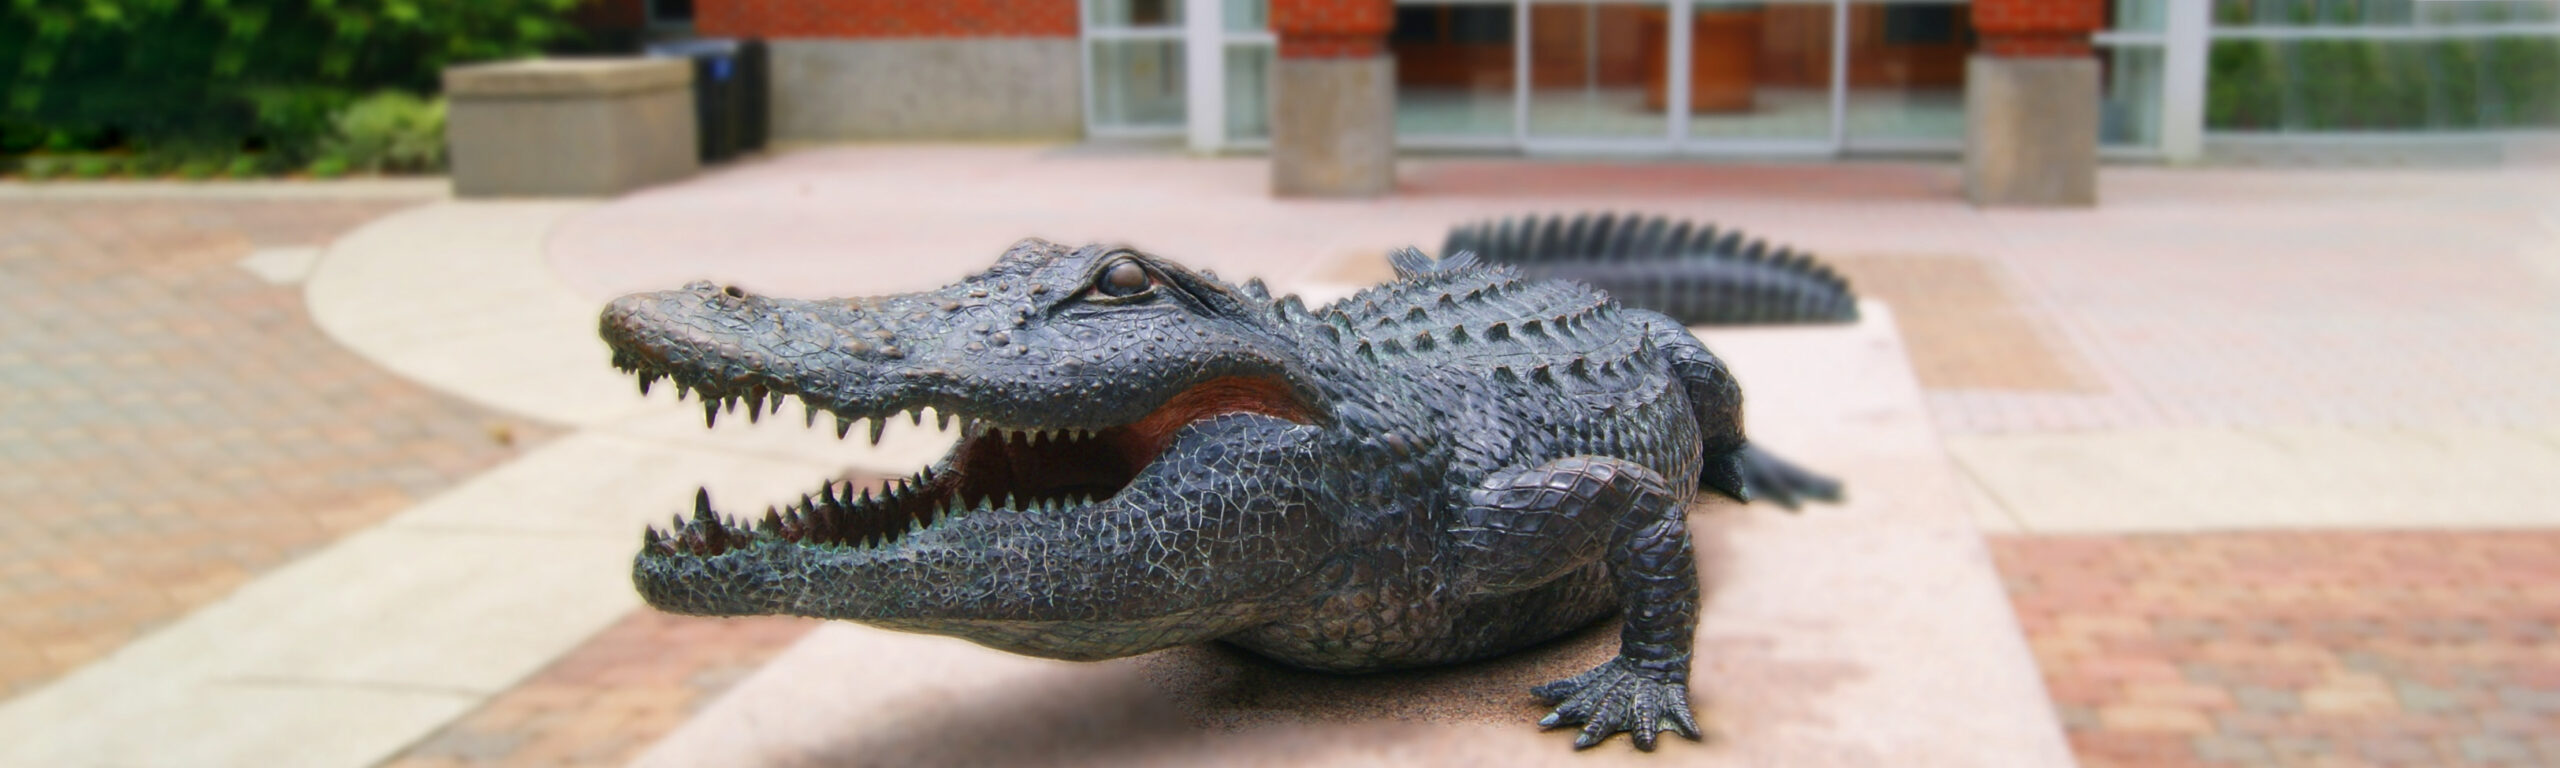 A Gator sculpture in front of the UF stadium.